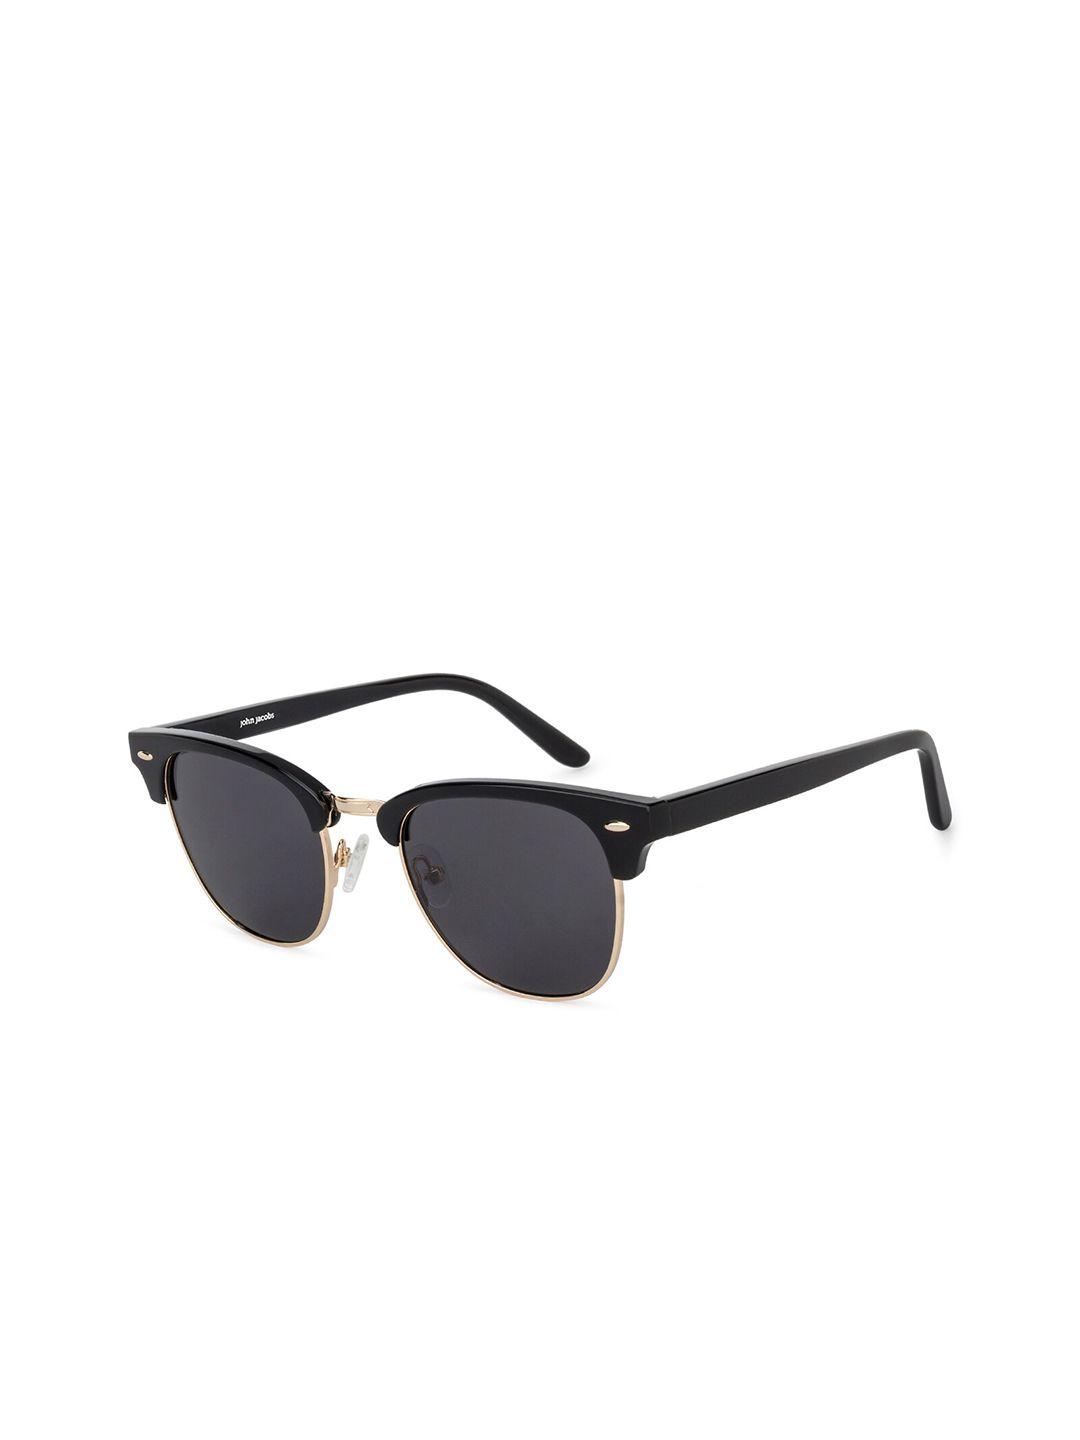 john jacobs unisex grey lens & black browline sunglasses with polarised and uv protected lens